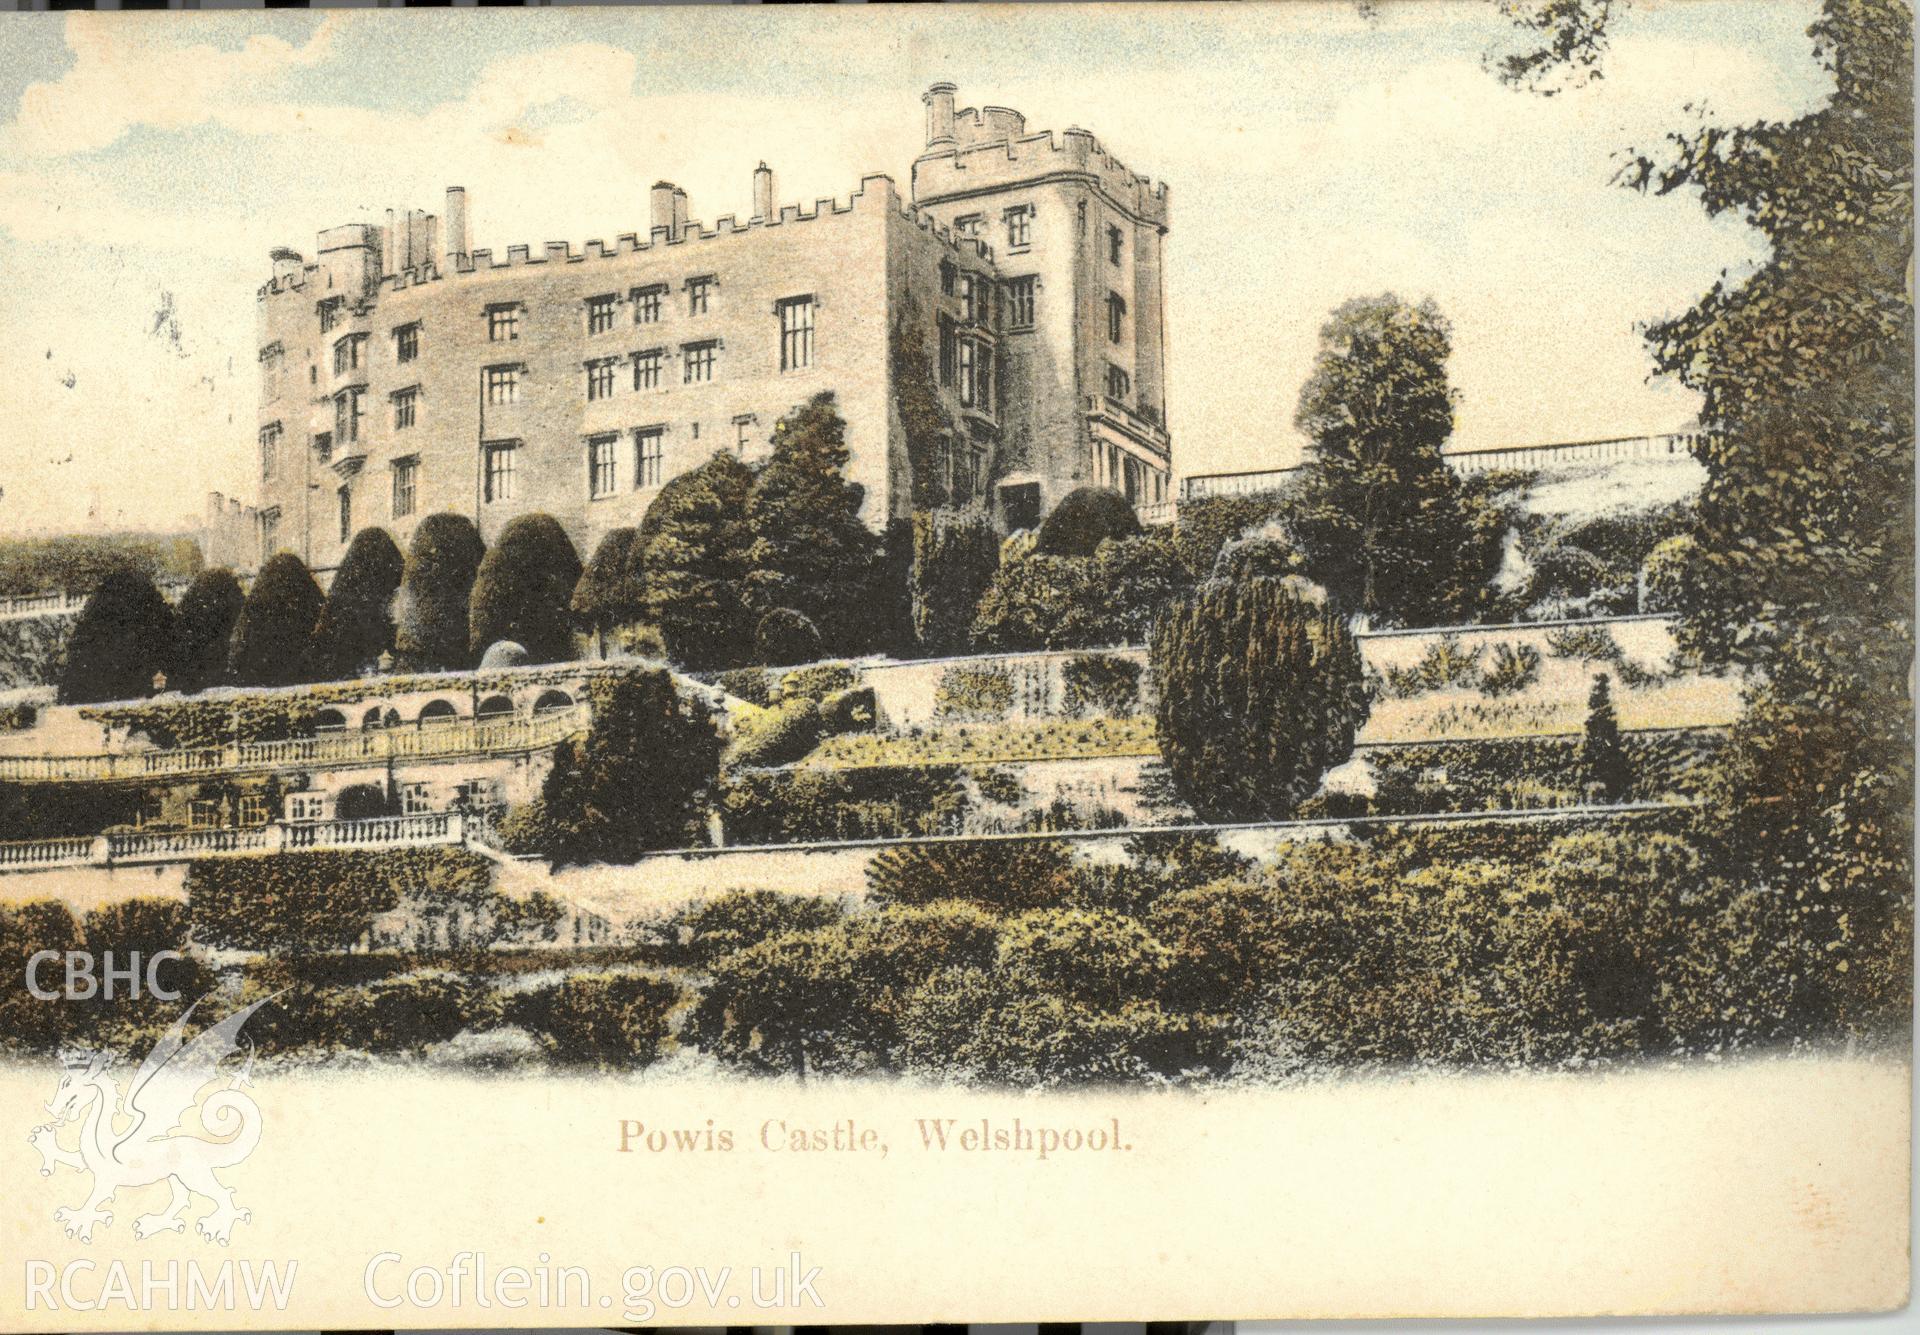 Digitised postcard image of Powis Castle showing Castle and terraces. Produced by Parks and Gardens Data Services, from an original item in the Peter Davis Collection at Parks and Gardens UK. We hold only web-resolution images of this collection, suitable for viewing on screen and for research purposes only. We do not hold the original images, or publication quality scans.